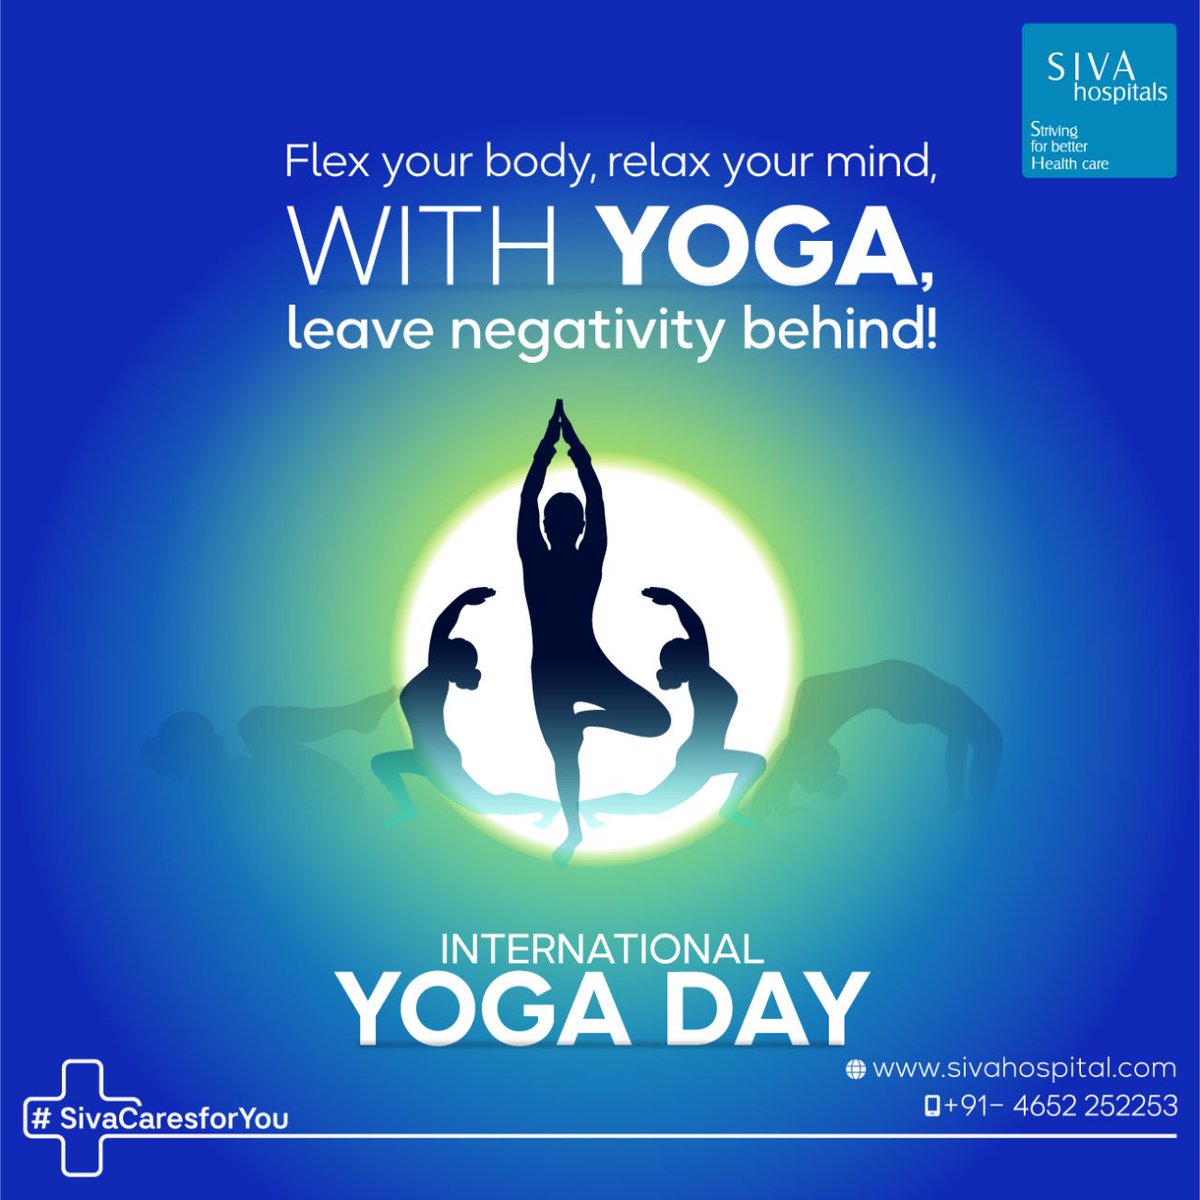 Yoga is the key that unlocks all physical and mental problems.

#sivahospital #healthylife #hospitality #wellbeing #positivity #surgerysuccess #besttreatment #InternationalYogaDay